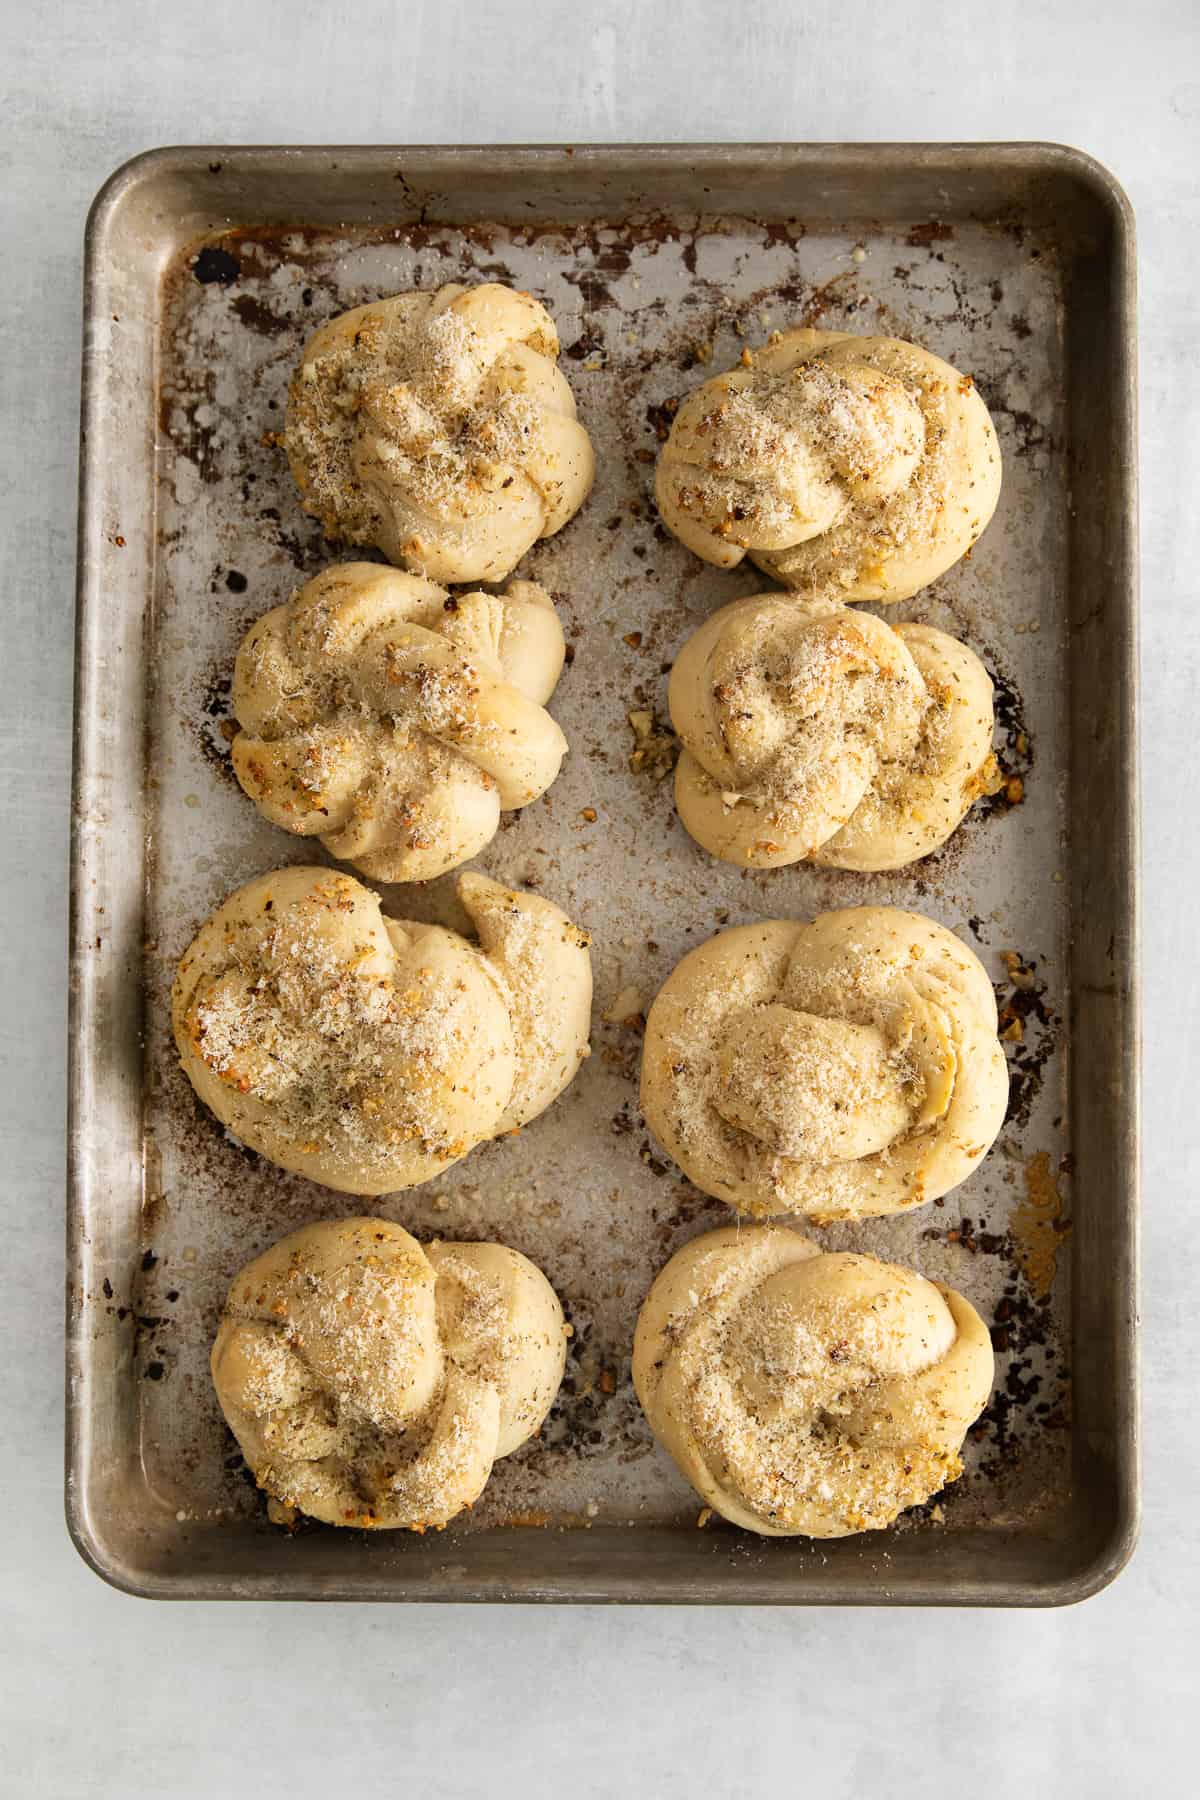 Baked knots with butter brushed over the top.